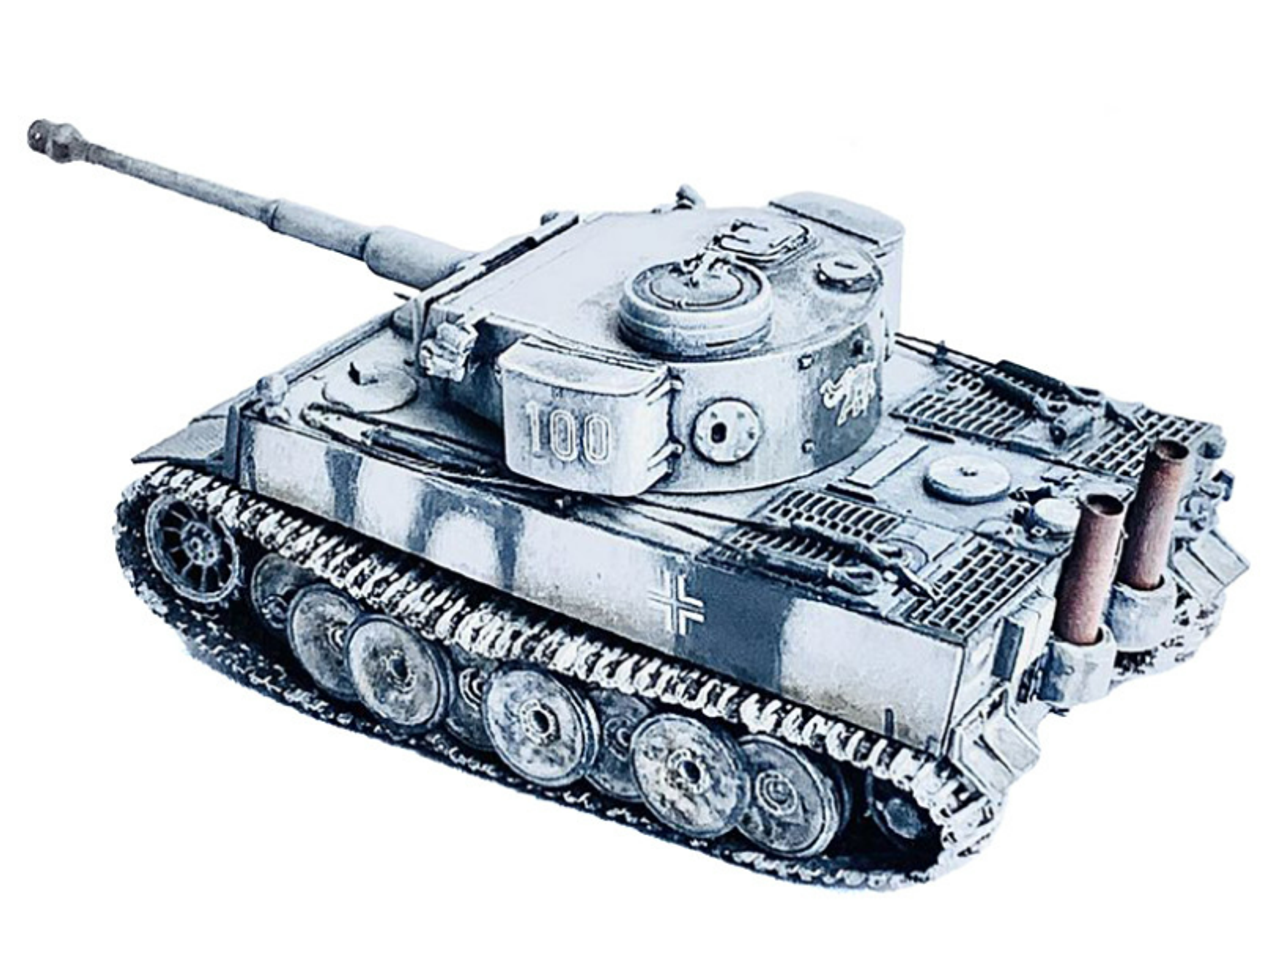 Germany Tiger I Initial Production Tank "s.Pz.Abt.502 Mga" (1942) "NEO Dragon Armor" Series 1/72 Plastic Model by Dragon Models